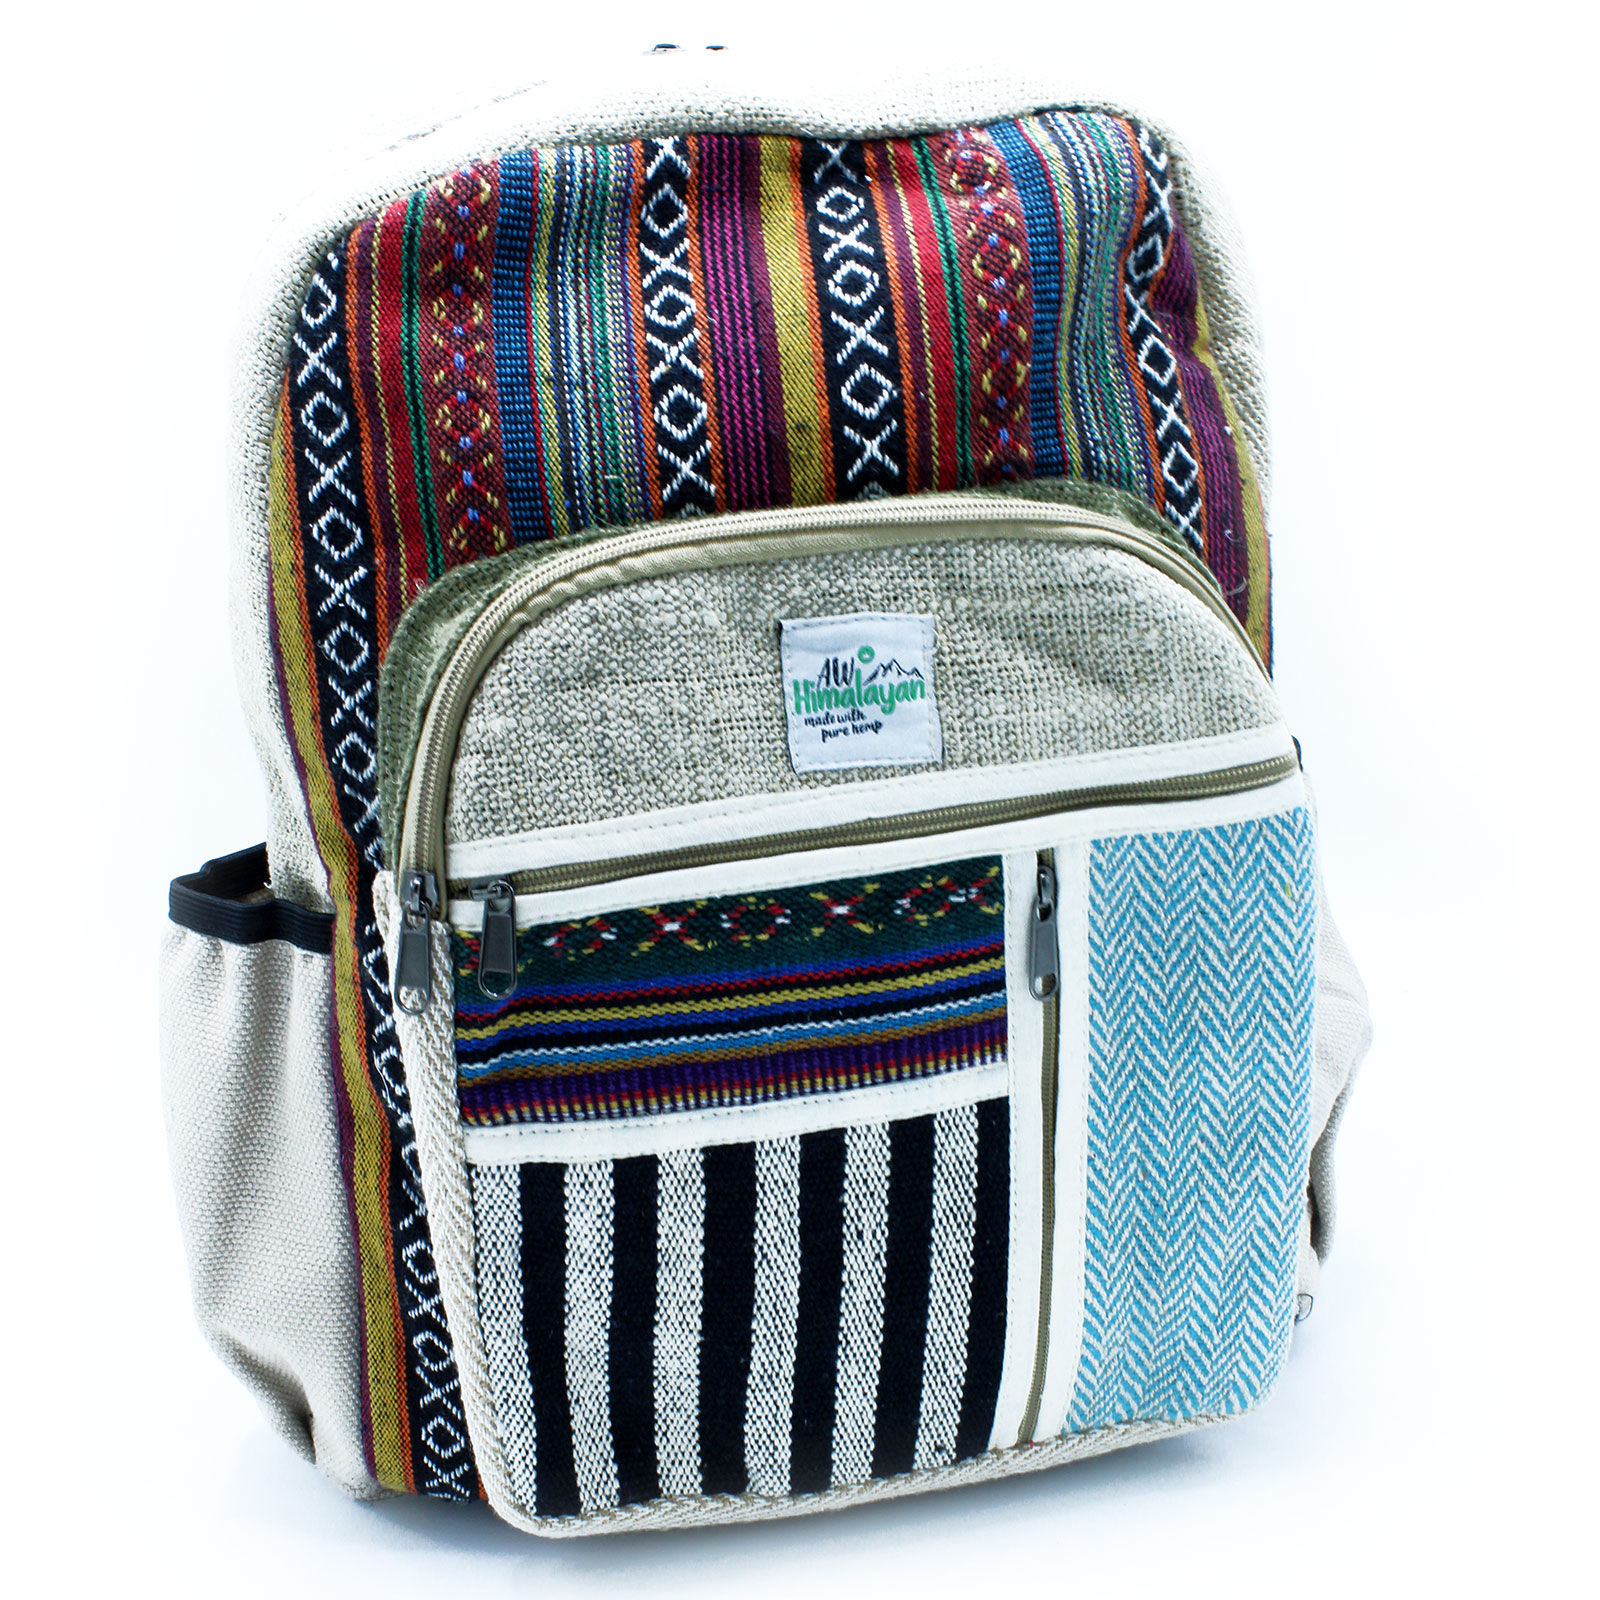 Large Backpack - Straight Zips Style